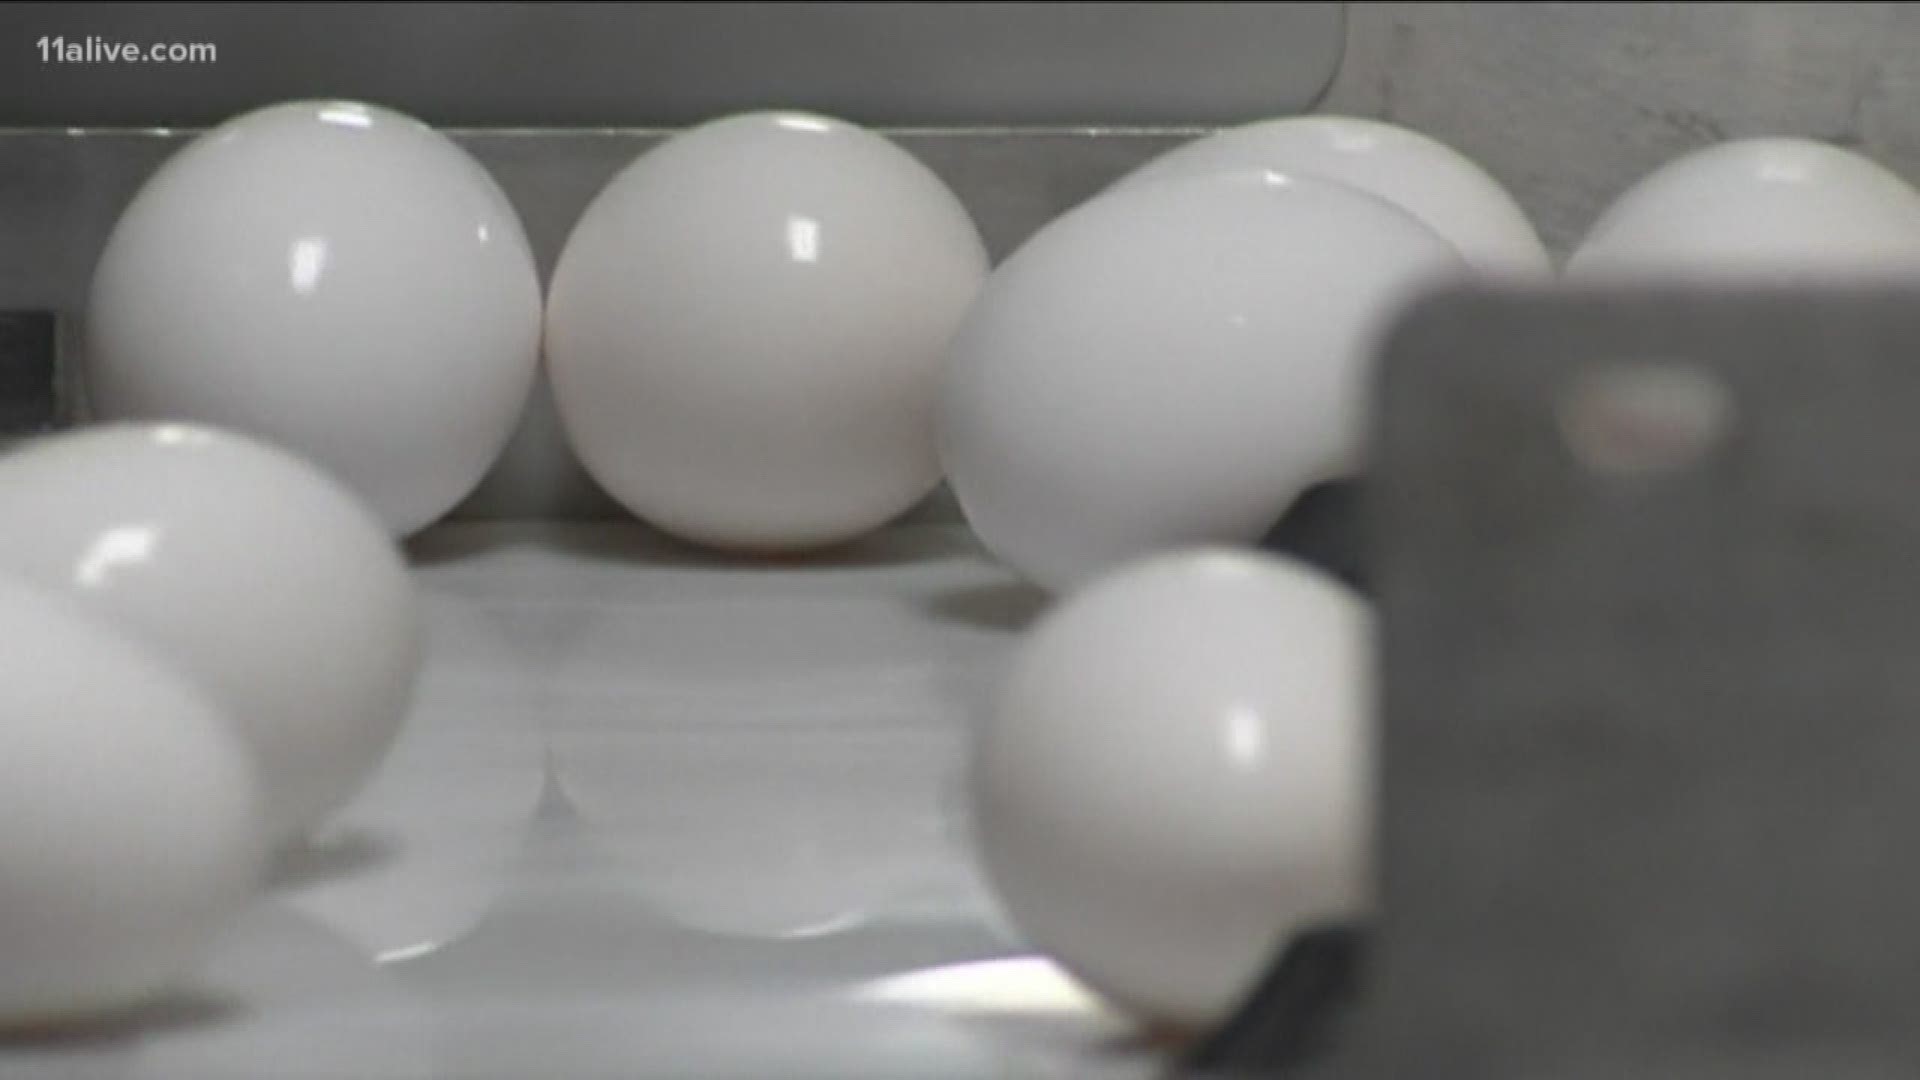 Seven people have gotten sick from the eggs, including one who has died.